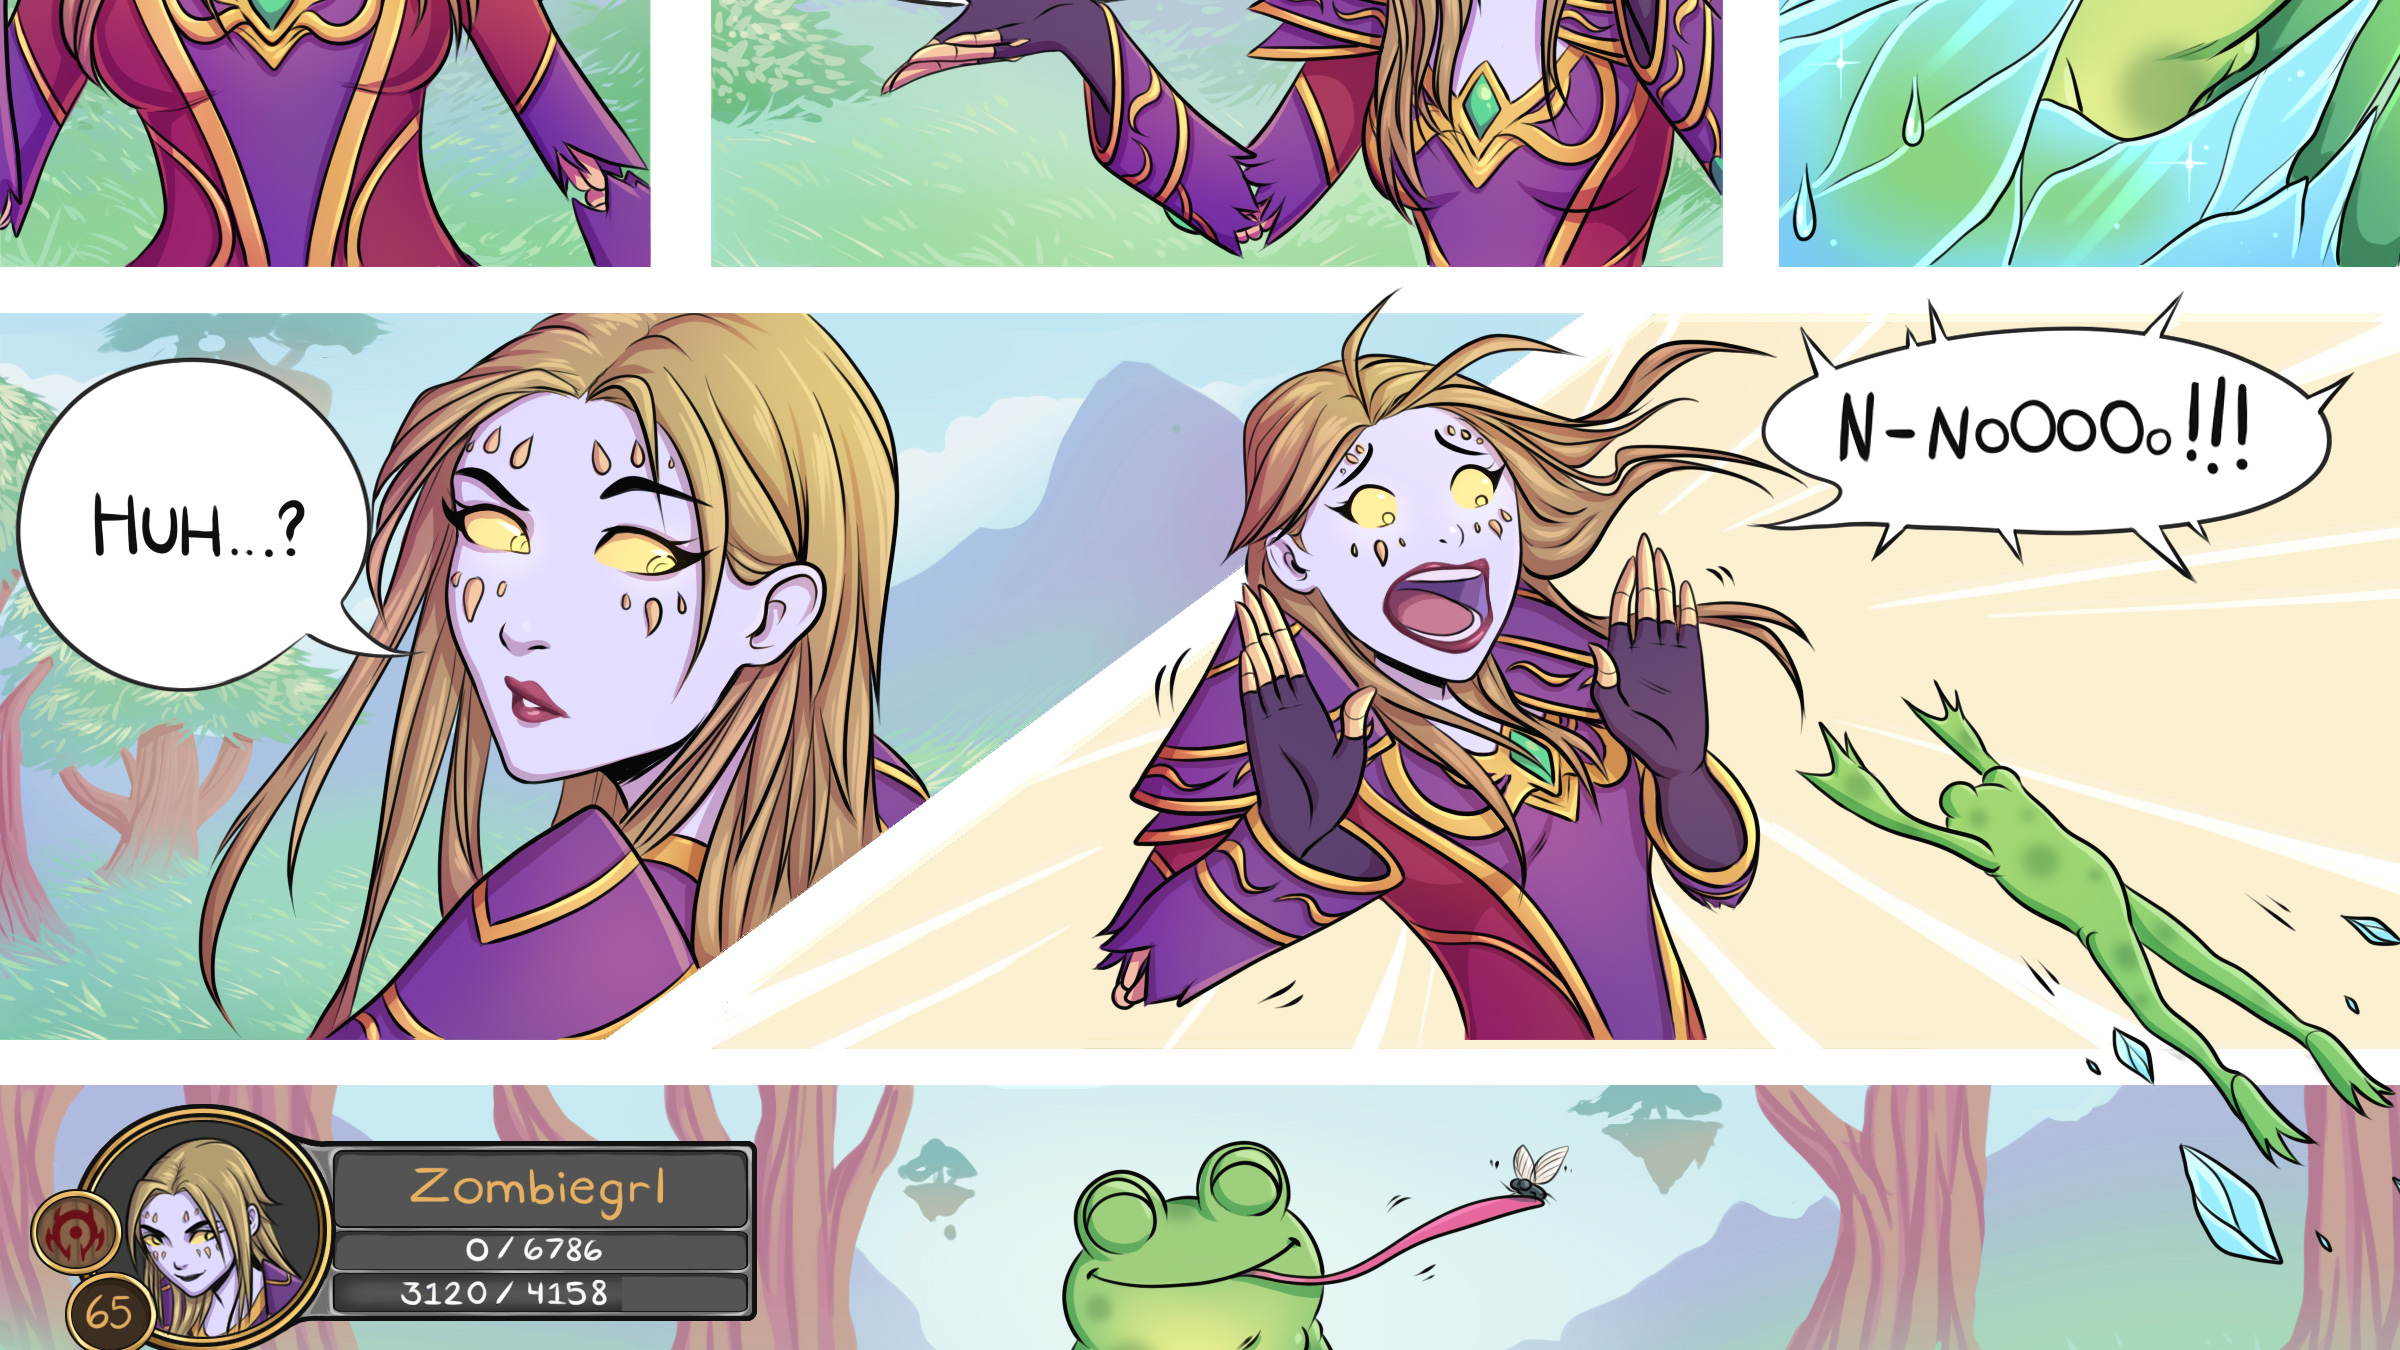 Death by Frog: Your WoW Stories told in Comics